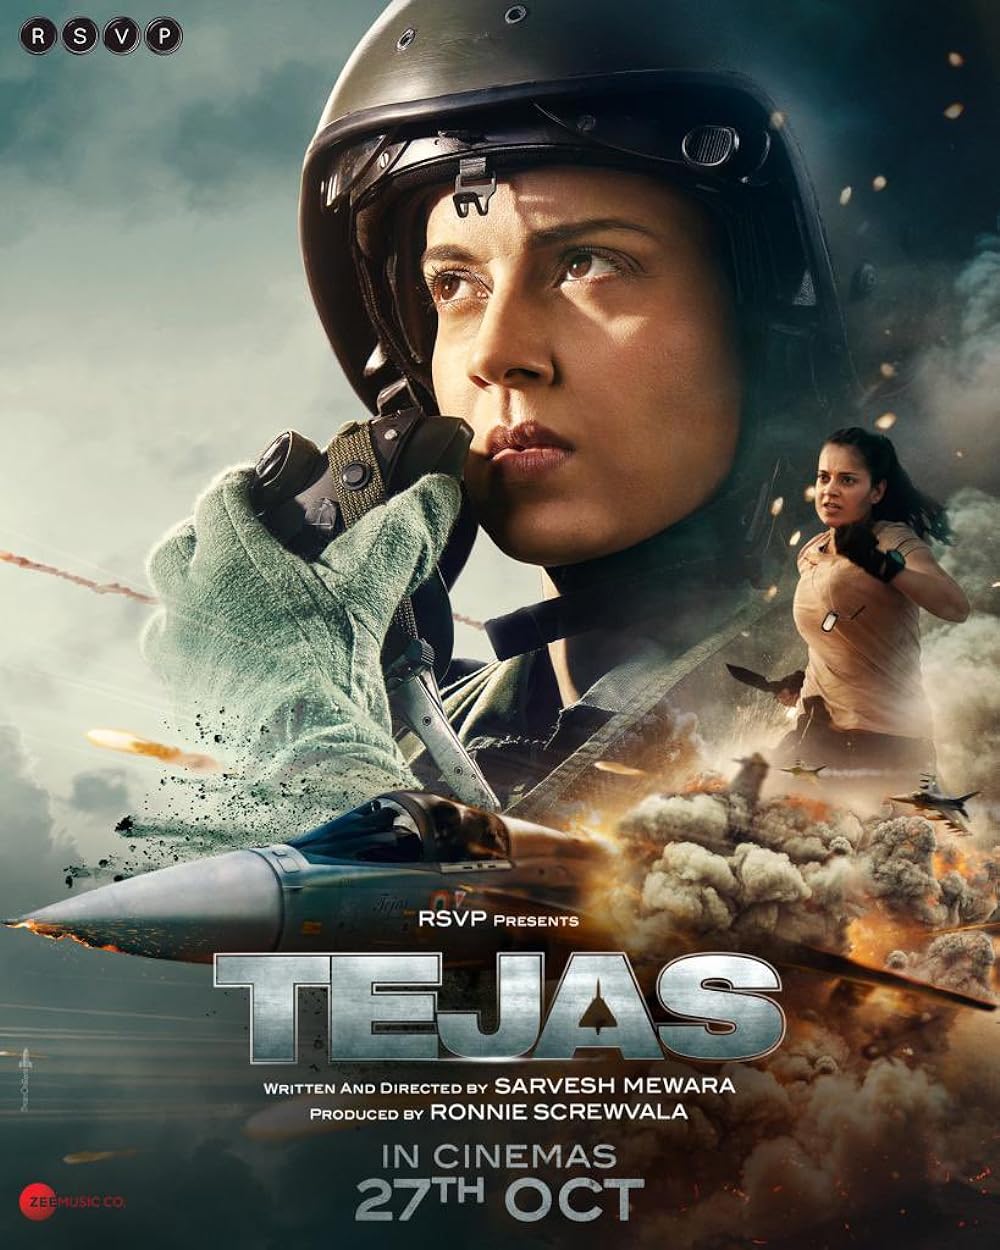 Bollywood movie Tejas Box Office Collection wiki, Koimoi, Wikipedia, Tejas Film cost, profits & Box office verdict Hit or Flop, latest update Budget, income, Profit, loss on MTWIKI, Bollywood Hungama, box office india